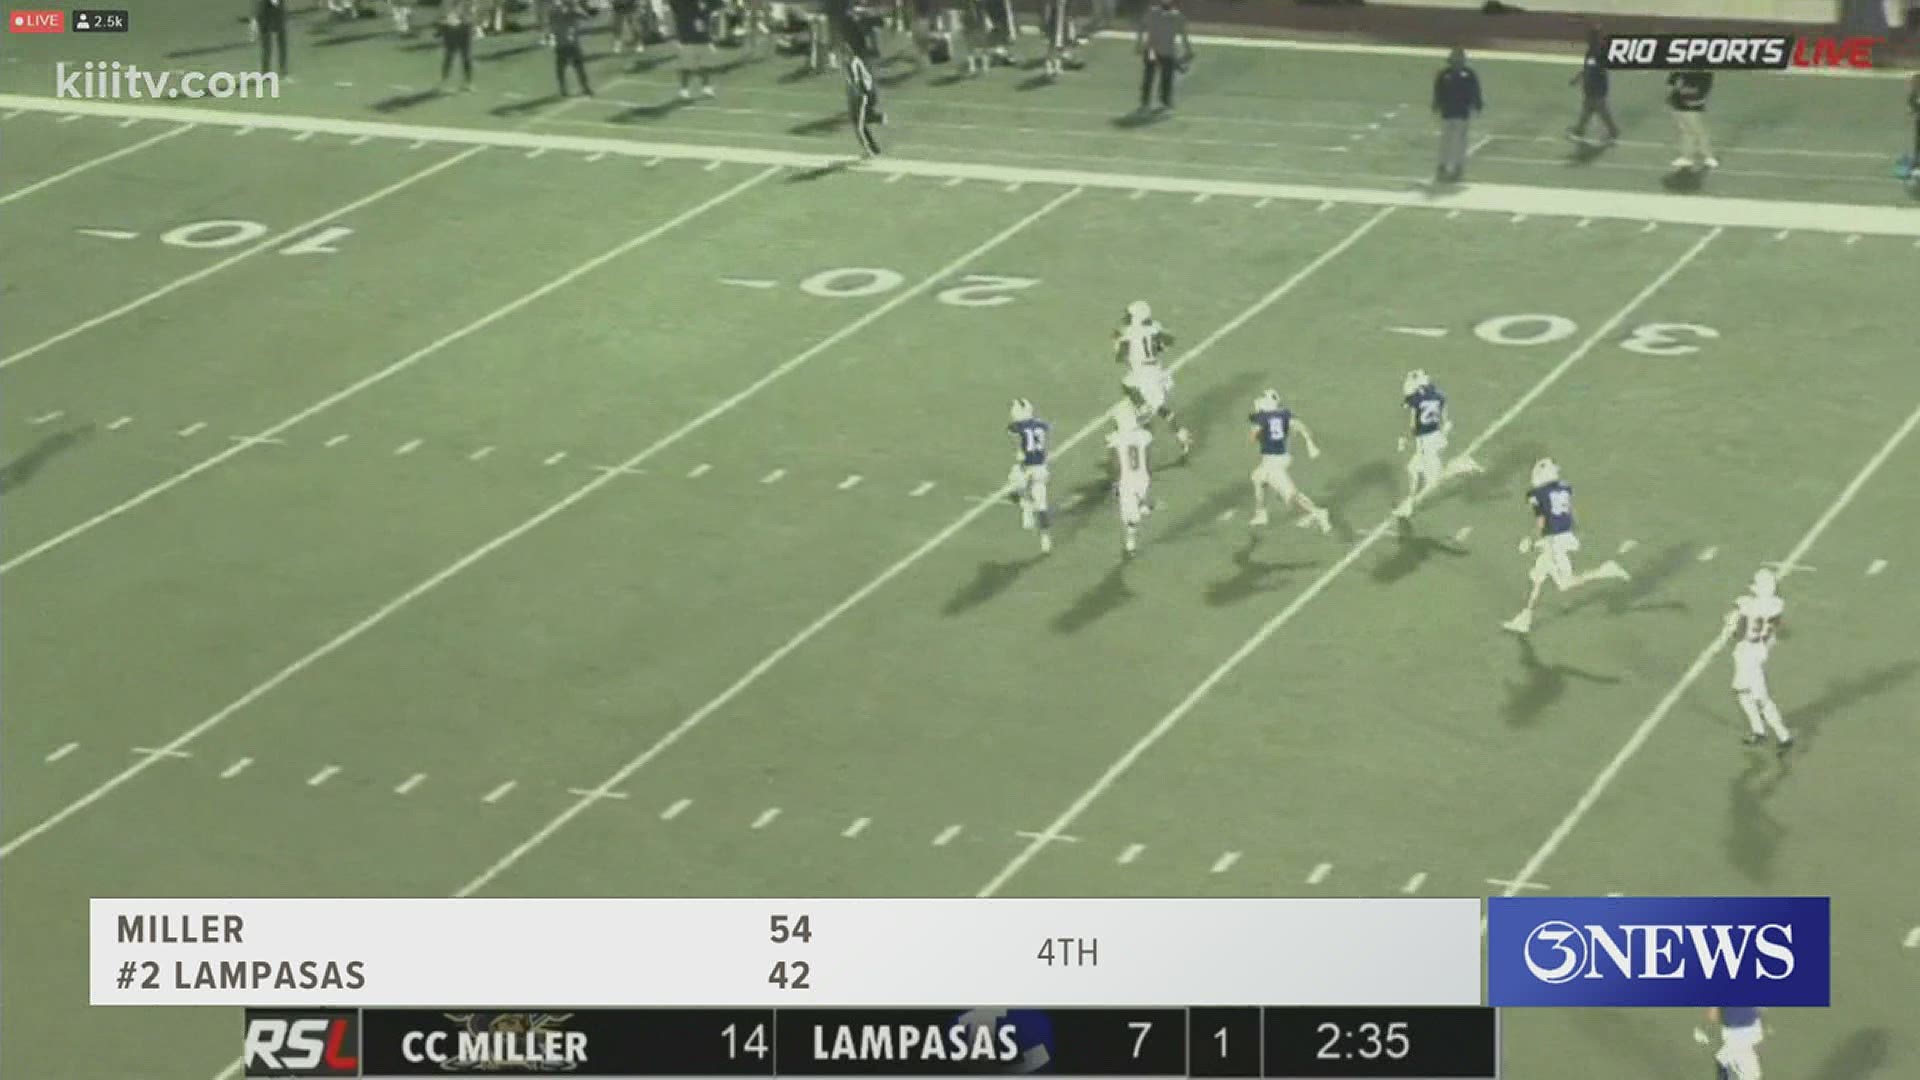 It was a battle down to the wire as the Miller Bucs would try to hold off the state ranked Lampasas Badgers in the Area round of the UIL State Playoffs.